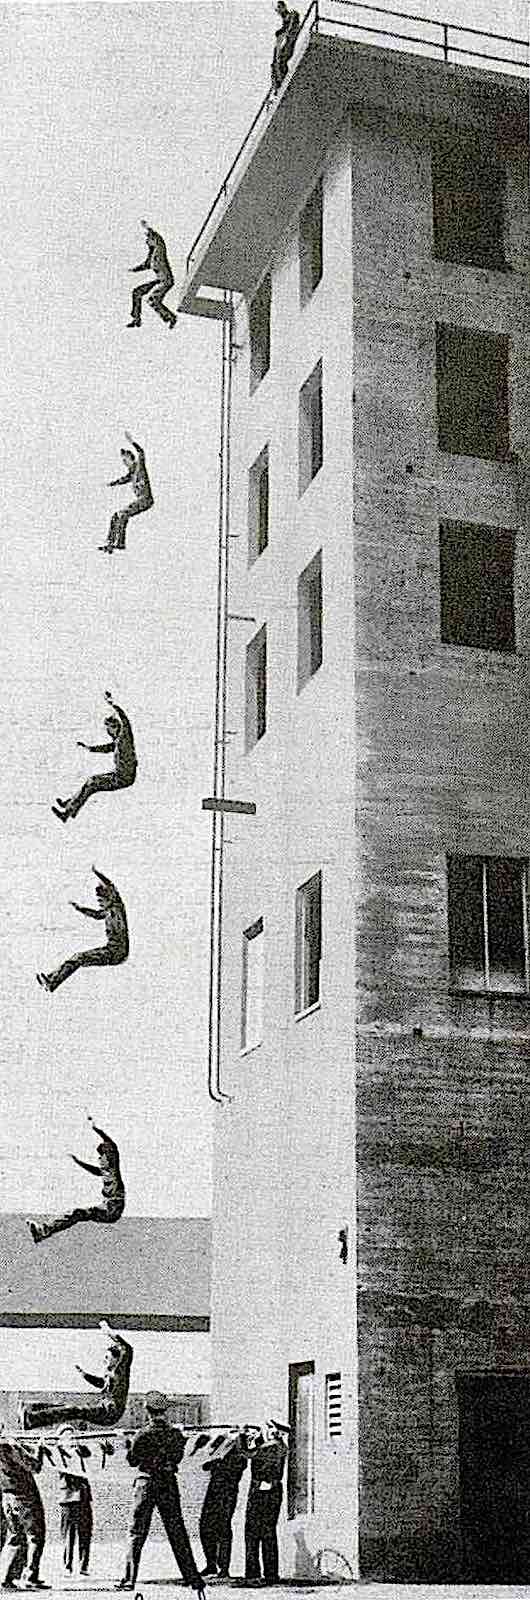 a multiple photograph of a man jumping from a building